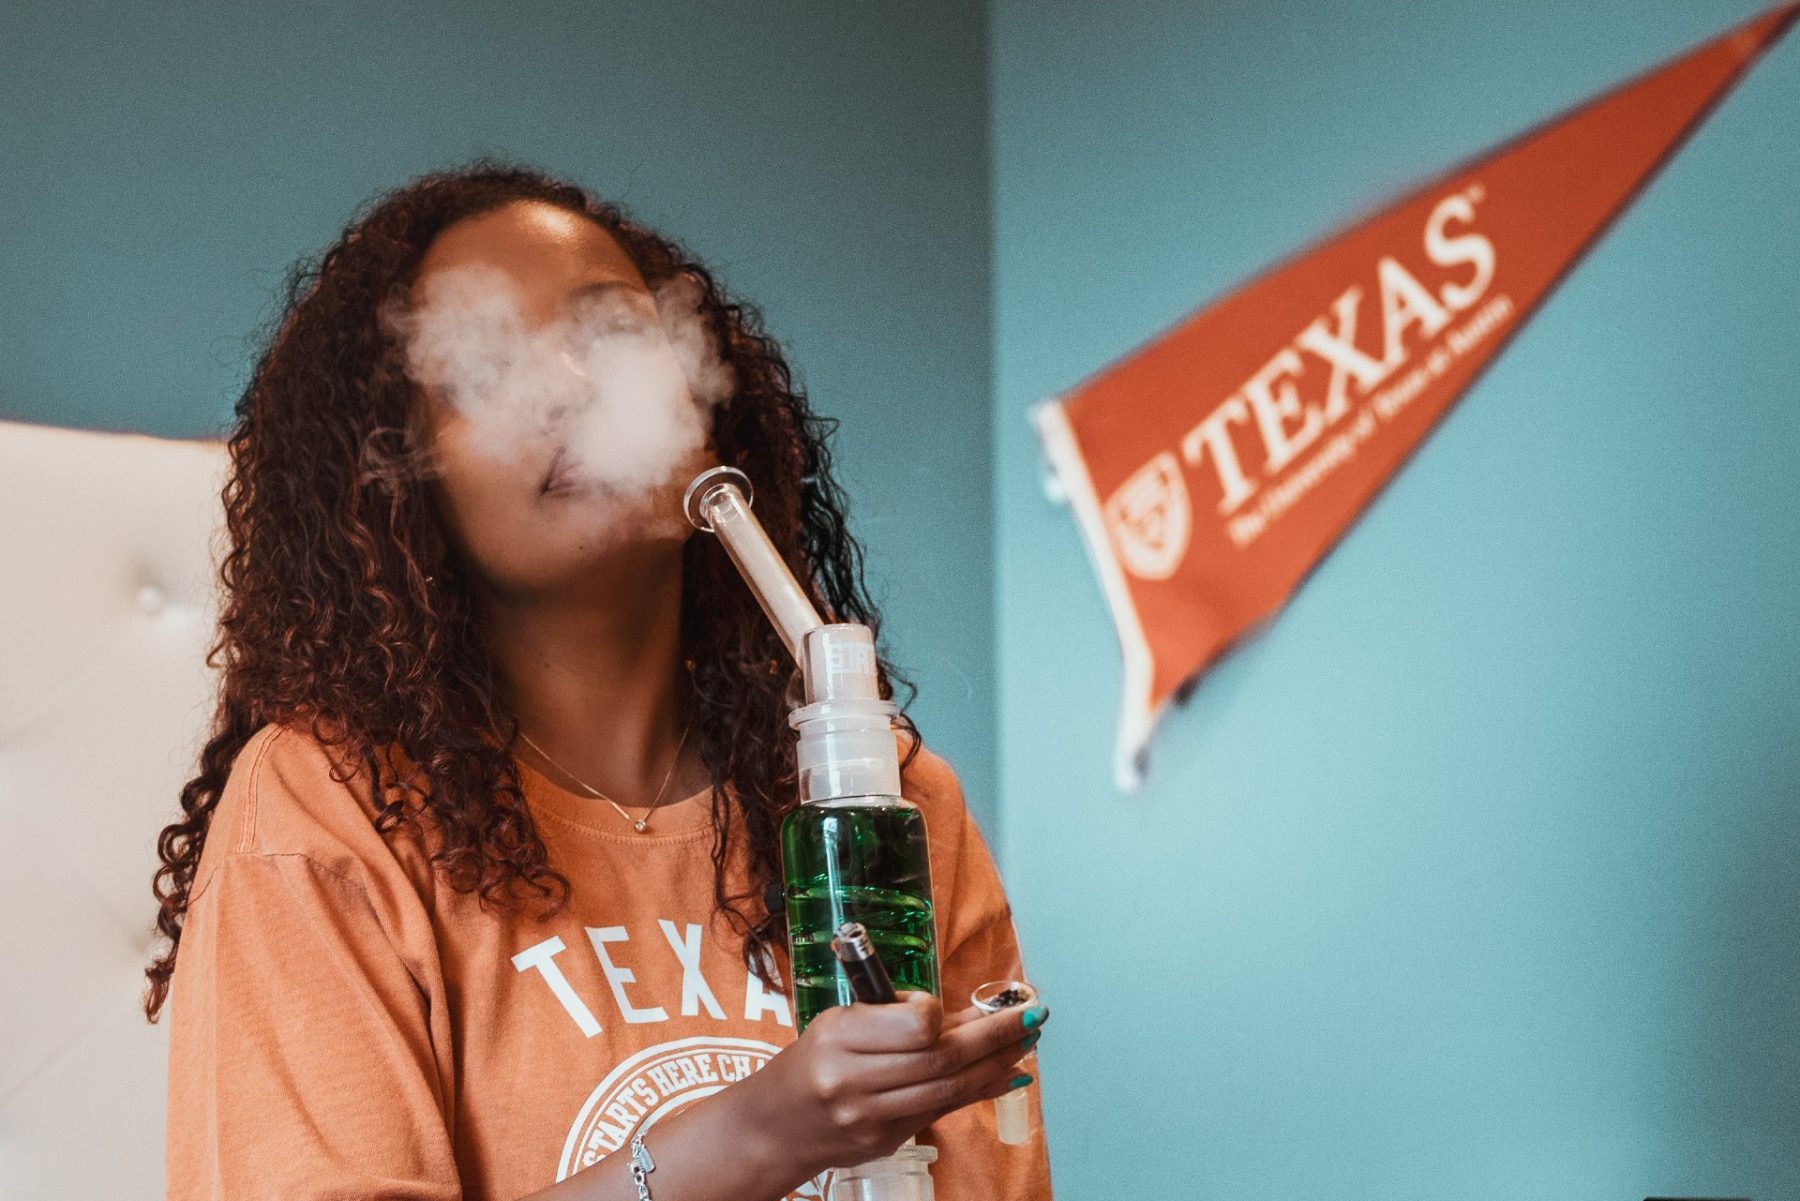 in an article about bongs, someone smoking out of a bong